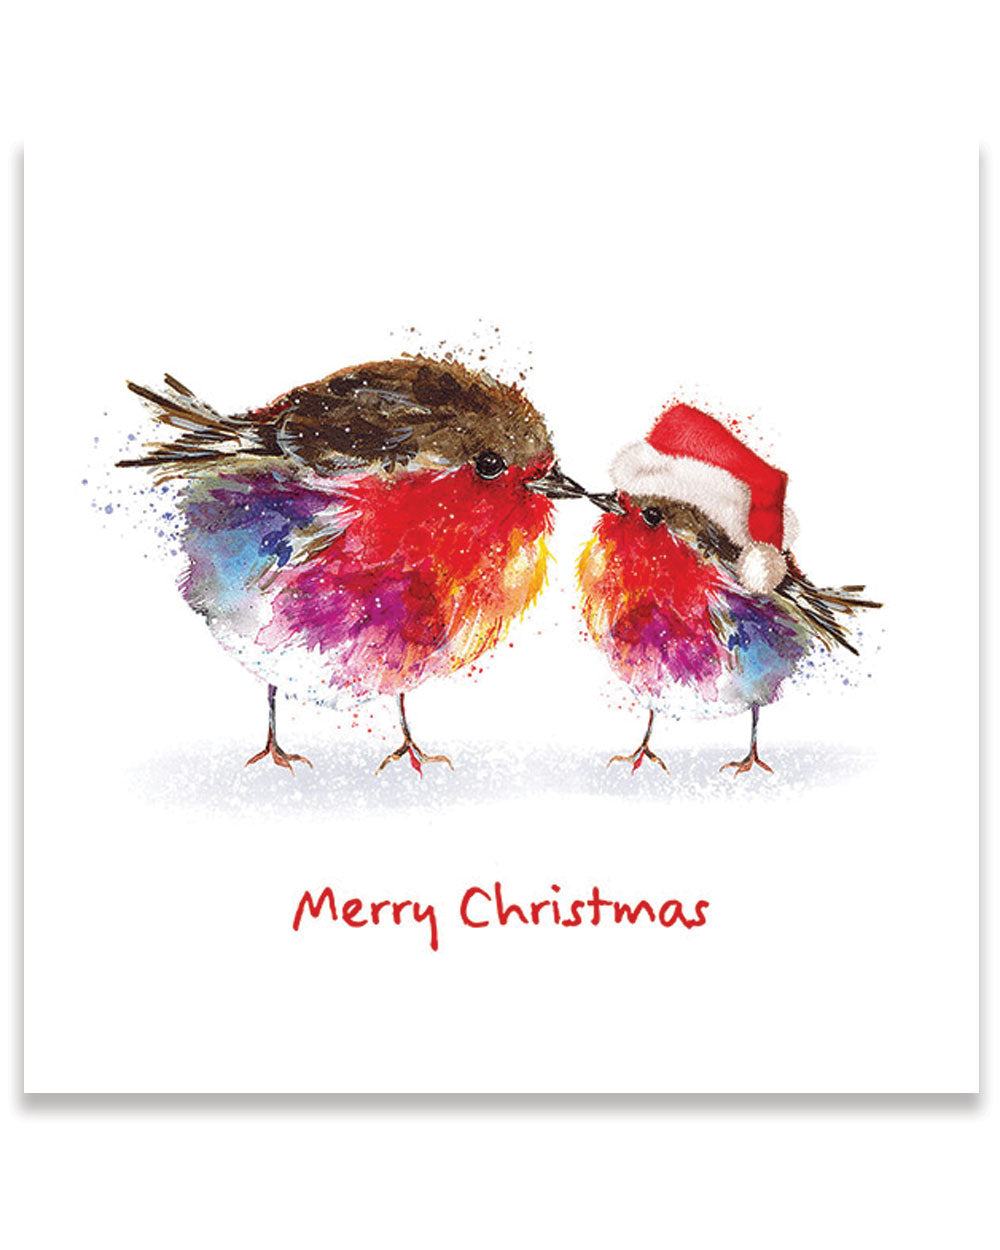 Introducing our enchanting pack of 10 charity Christmas cards, designed to bring a smile to your face and warmth to your heart. These cards feature an endearing duo: a pair of fluffy red-breasted Robins, one of them a sweet baby wearing a festive Christmas hat. Their charm is perfectly complemented by the heartfelt message "Merry Christmas" in a joyful shade of red printed  on the front of each card.